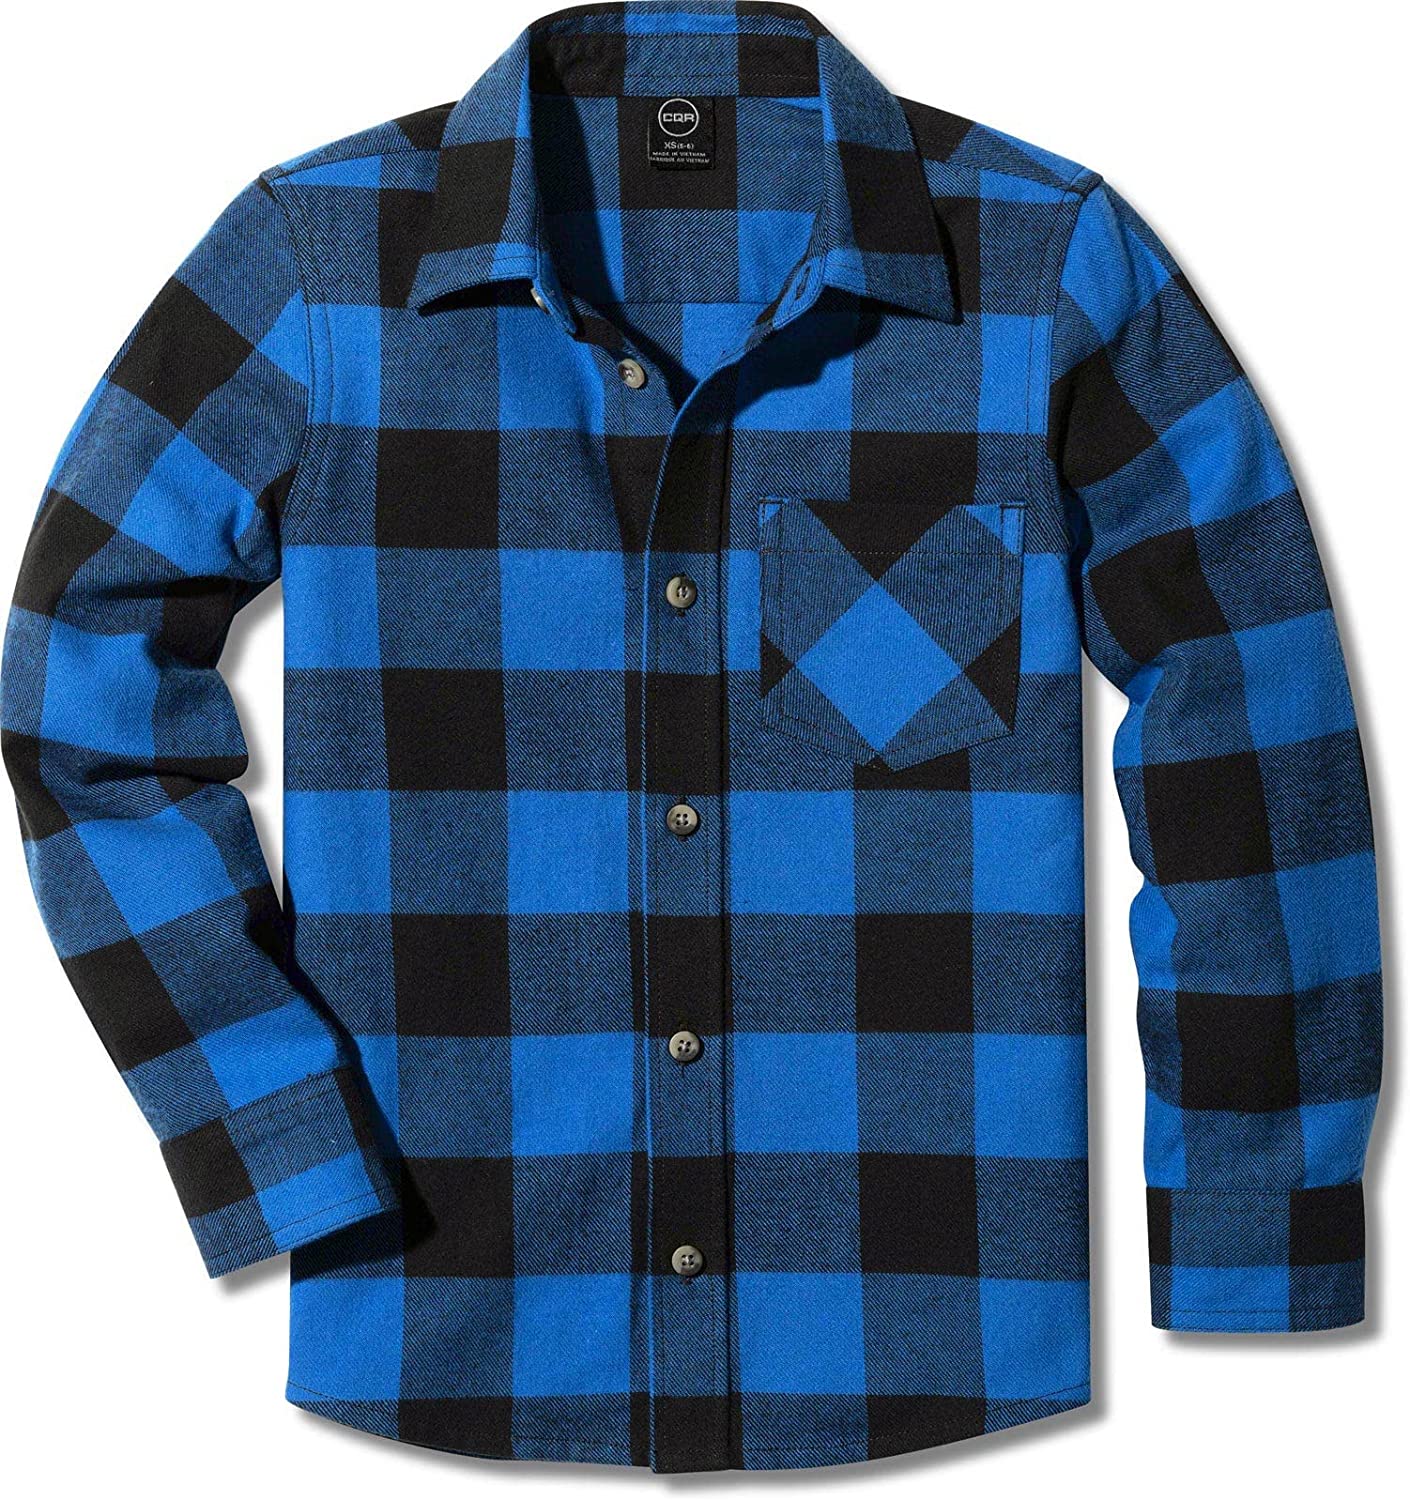 All-Cotton Soft Brushed Casual Button Down Shirts CQR Kids Little Boys Girls Baby Plaid Flannel Shirt Long Sleeve 